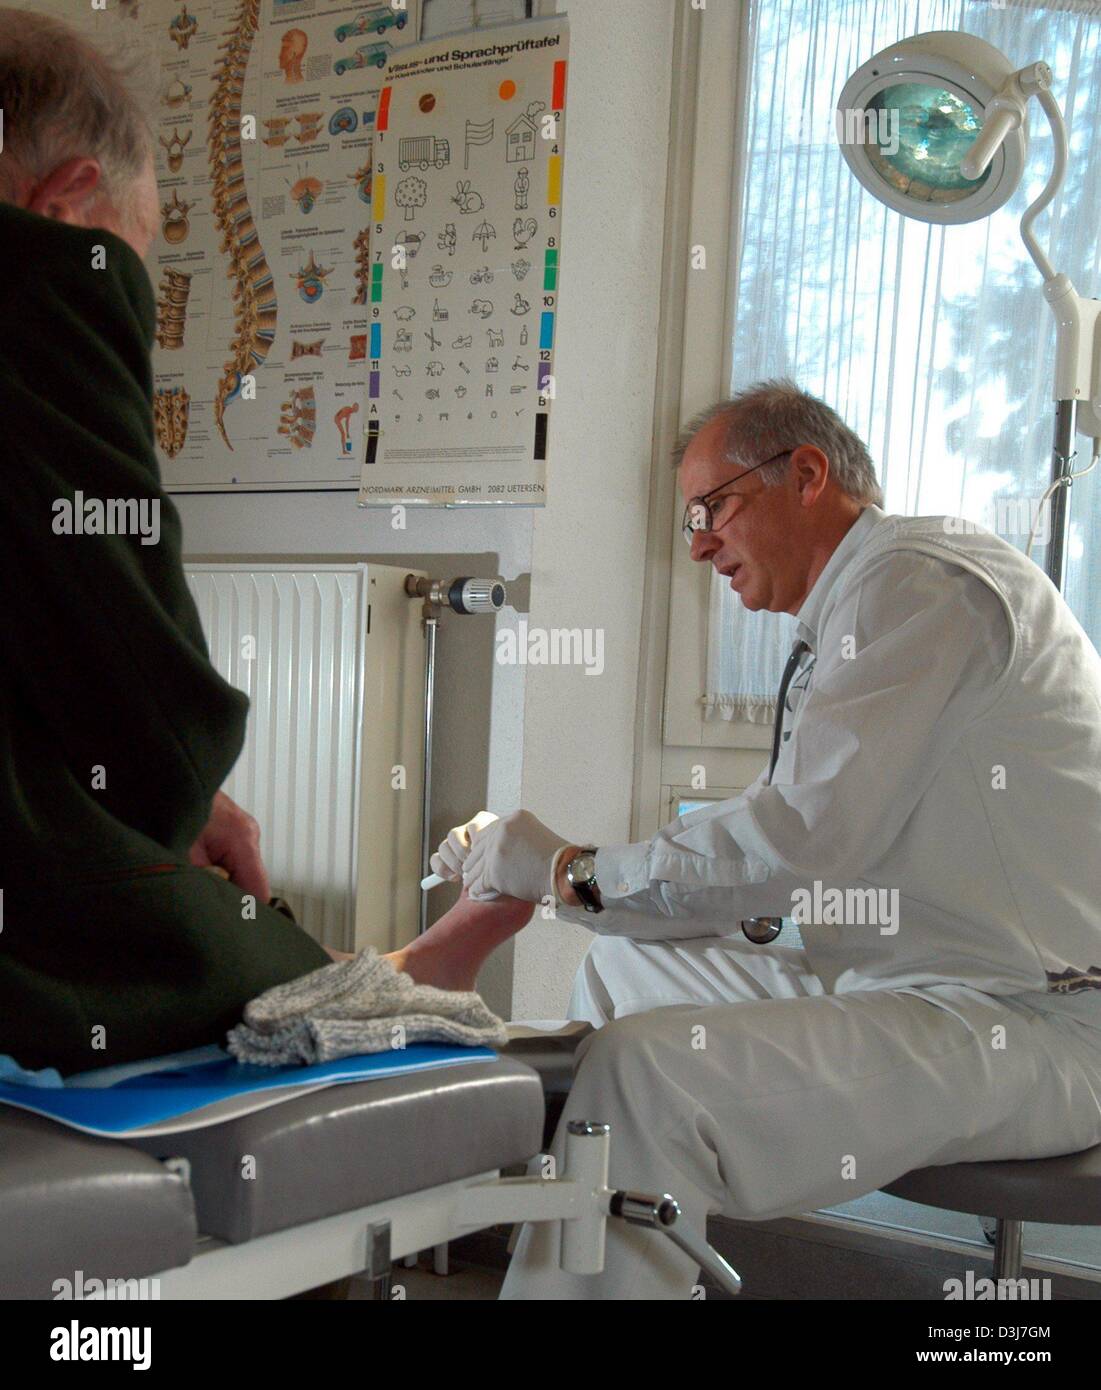 (dpa) - Physician Rainer Graeter treats a patient's foot injury in Essingen, Germany, 16 February 2004. Graeter is a country doctor in the rural German 'Schwaebische Alb' region. Next to his practice he also visits his patients at their houses. Stock Photo